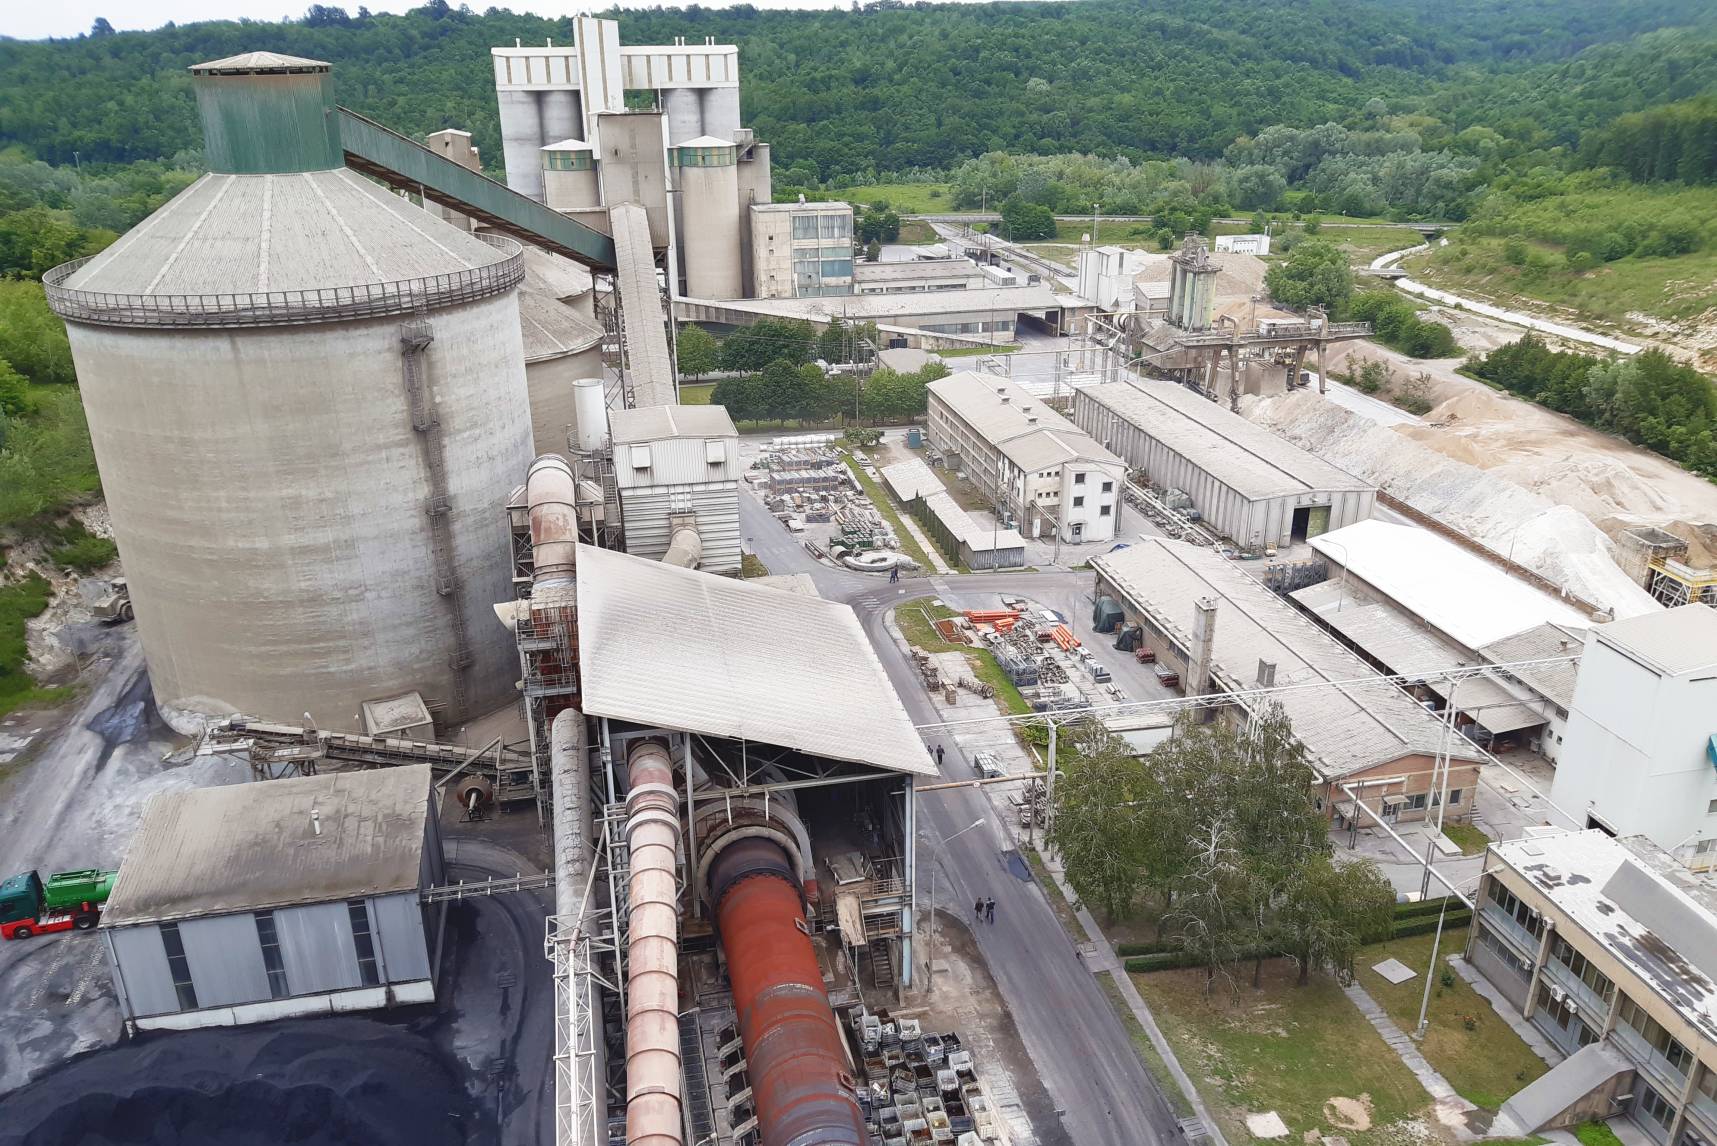 Successful Commissioning of a Process Line for the Transportation and Dosing of Solid Alternative Fuels to the second largest Cement Plant in Croatia